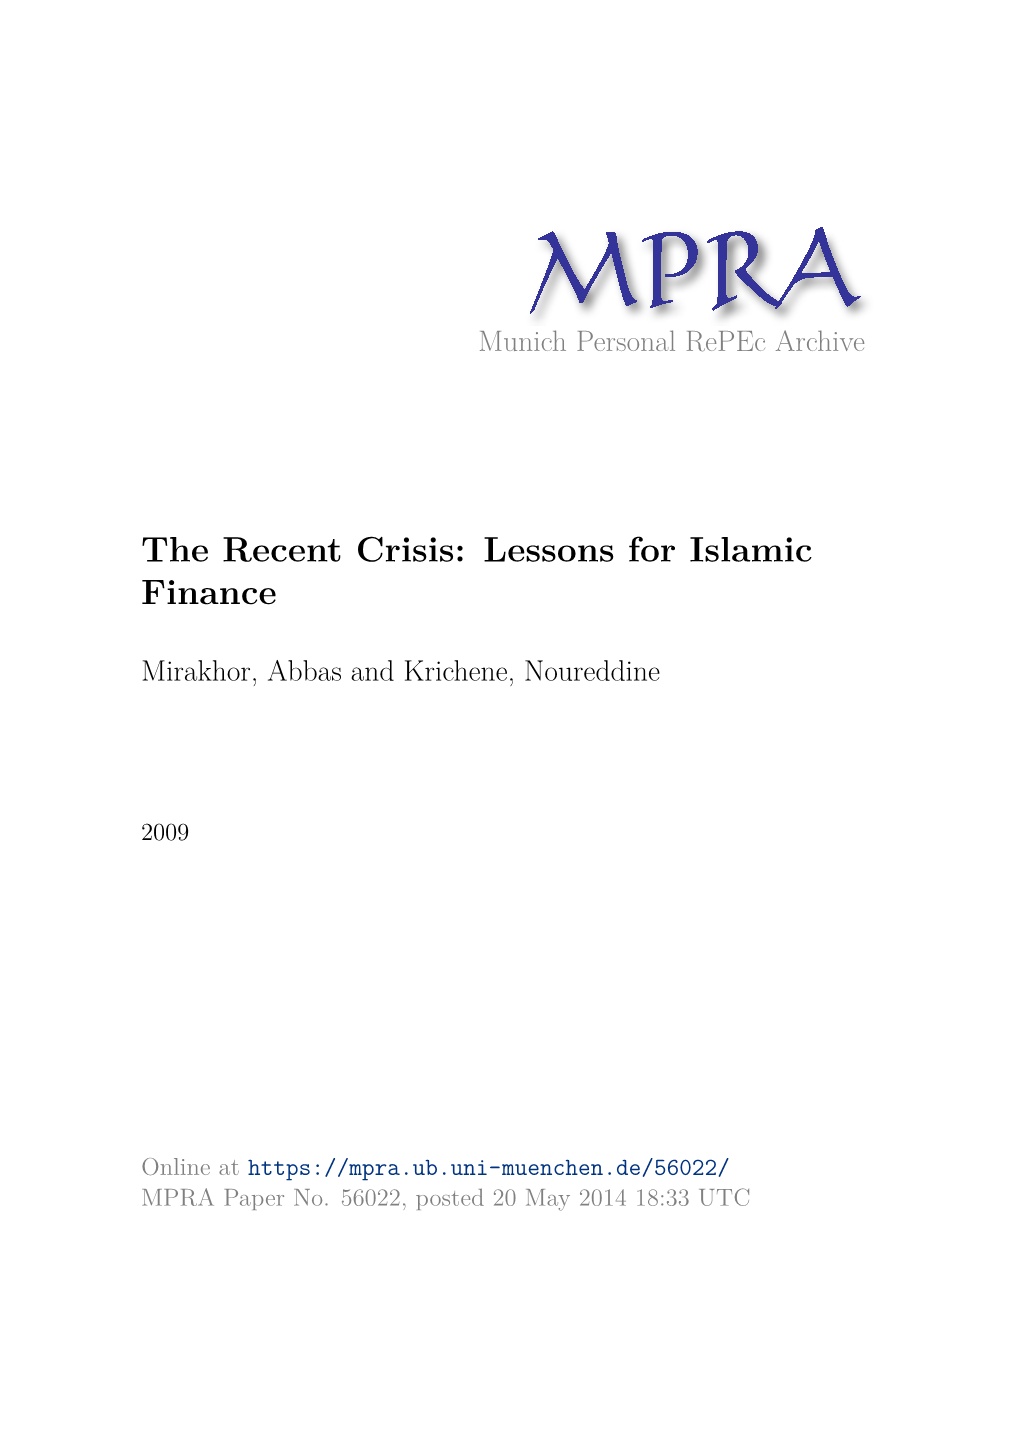 The Recent Crisis: Lessons for Islamic Finance